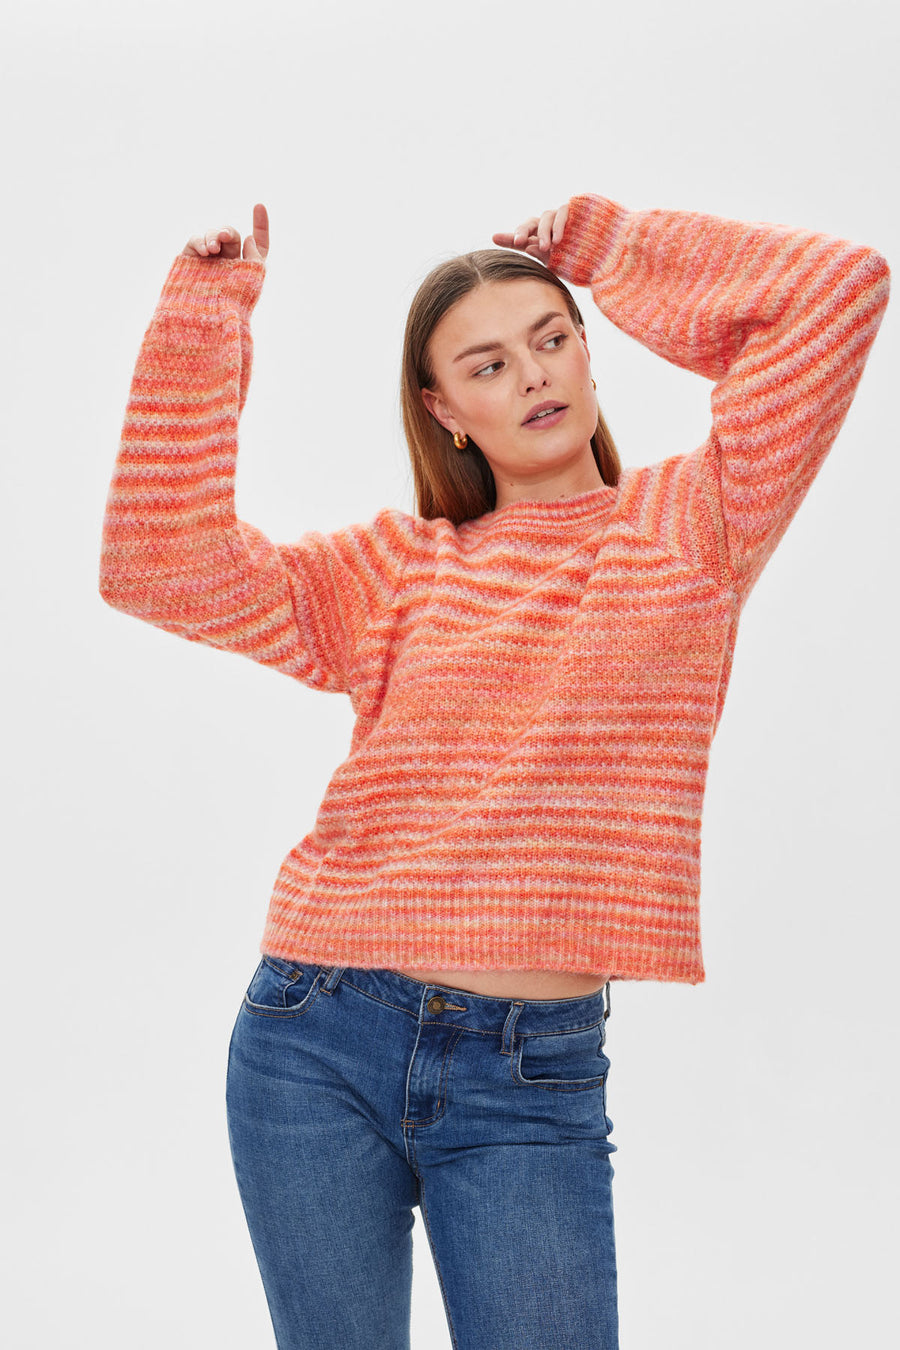 FQPULZY - KNIT PULLOVER WITH STRIPES - ORANGE AND BEIGE